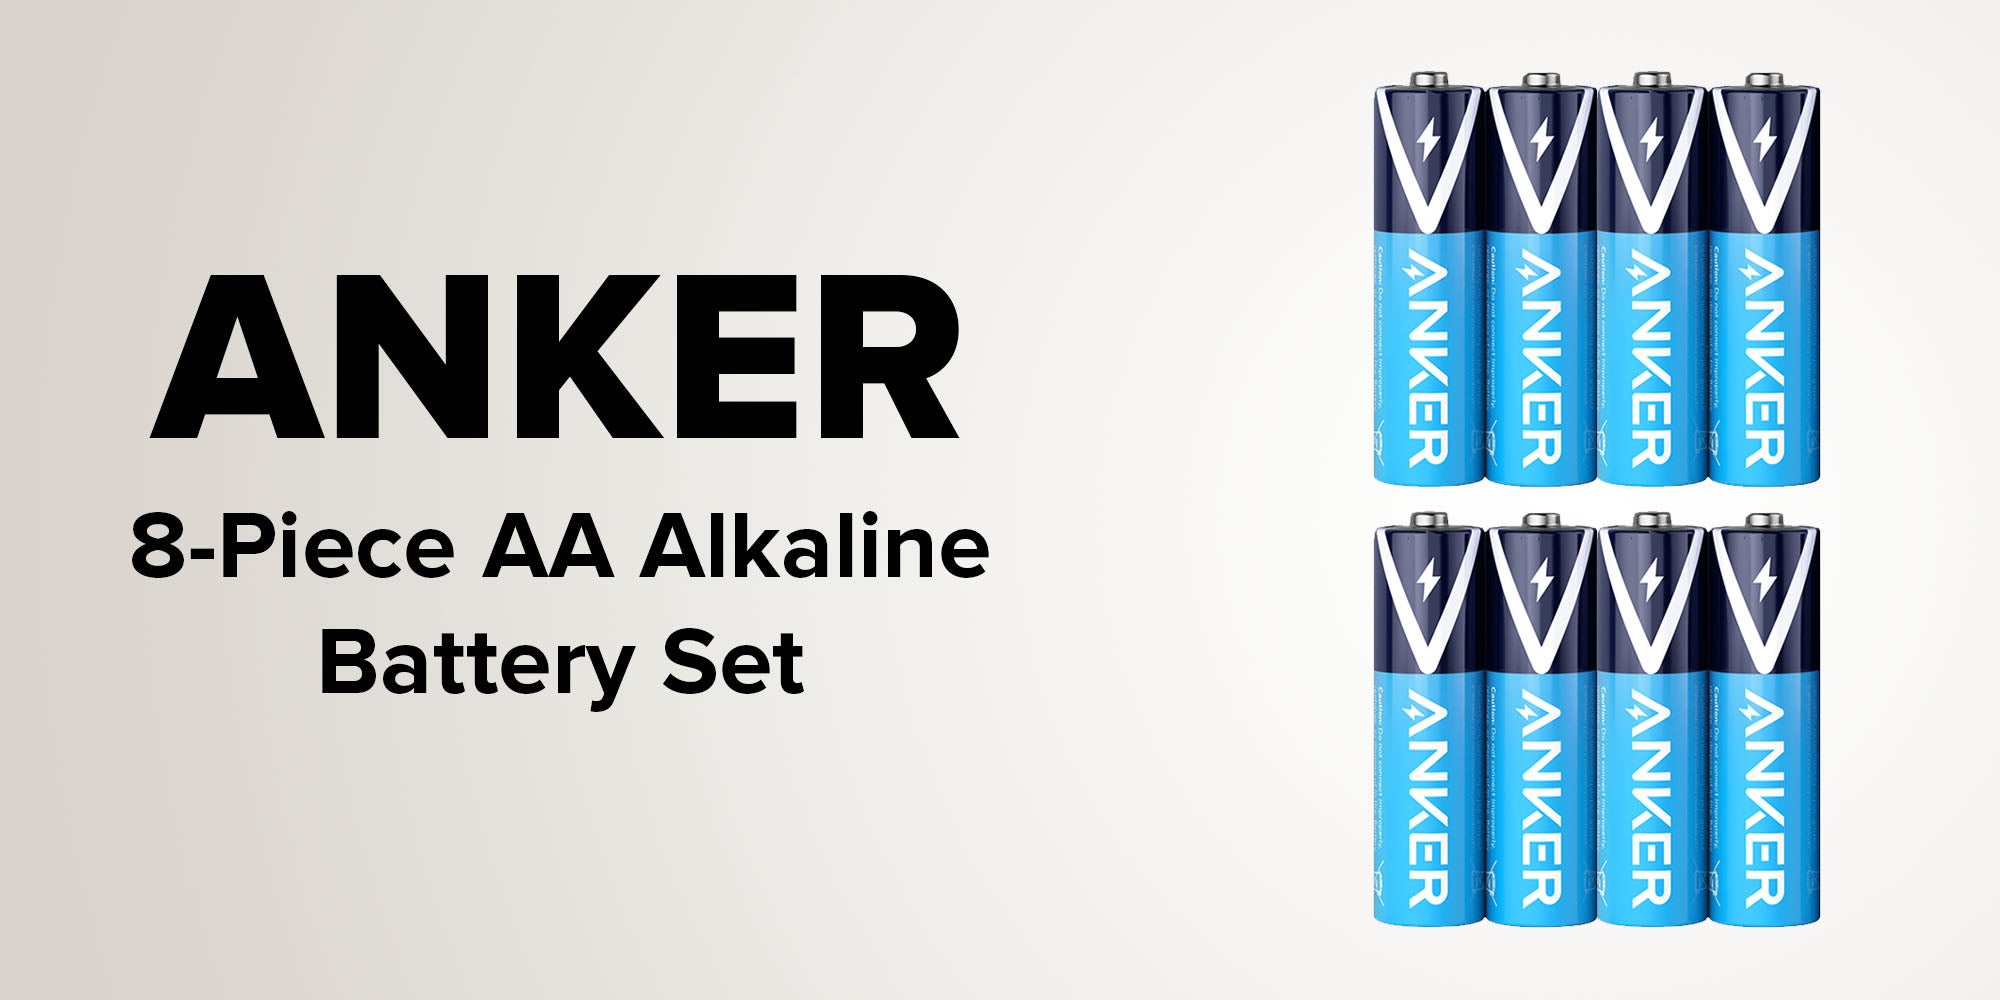 N37389993A 1 Anker &Lt;H1 Class=&Quot;Product_Title Entry-Title&Quot;&Gt;Anker Aa8 Alkaline Battery 8 Pack - B1810H13&Lt;/H1&Gt; Https://Www.youtube.com/Watch?V=H8Eld2V51Cw &Lt;Ul&Gt; &Lt;Li&Gt;Built With Premium Components And Advanced Engineering To Provide Superior Protection&Lt;/Li&Gt; &Lt;Li&Gt;Batteries Are Optimized For A Variety Of Different Devices&Lt;/Li&Gt; &Lt;Li&Gt;Allowing For Improved Efficiency And Universal Compatibility&Lt;/Li&Gt; &Lt;Li&Gt;High-Quality Alkaline Batteries Last Longer Than Conventional Batteries&Lt;/Li&Gt; &Lt;Li&Gt;Reliable Portable Power That Maximizes Fun, Productivity And Safety&Lt;/Li&Gt; &Lt;/Ul&Gt; &Lt;H1 Class=&Quot;Product_Title Entry-Title&Quot;&Gt;&Lt;A Style=&Quot;Font-Size: 16Px;&Quot; Href=&Quot;Https://Lablaab.com/Product-Category/Beauty-And-Personal-Care/&Quot;&Gt;More Products&Lt;/A&Gt;&Lt;/H1&Gt; &Lt;B&Gt;We Also Provide International Wholesale And Retail Shipping To All Gcc Countries: Saudi Arabia, Qatar, Oman, Kuwait, Bahrain. &Lt;/B&Gt; Anker Aa8 Alkaline Battery Anker Aa8 Alkaline Battery 8 Pack - B1810H13